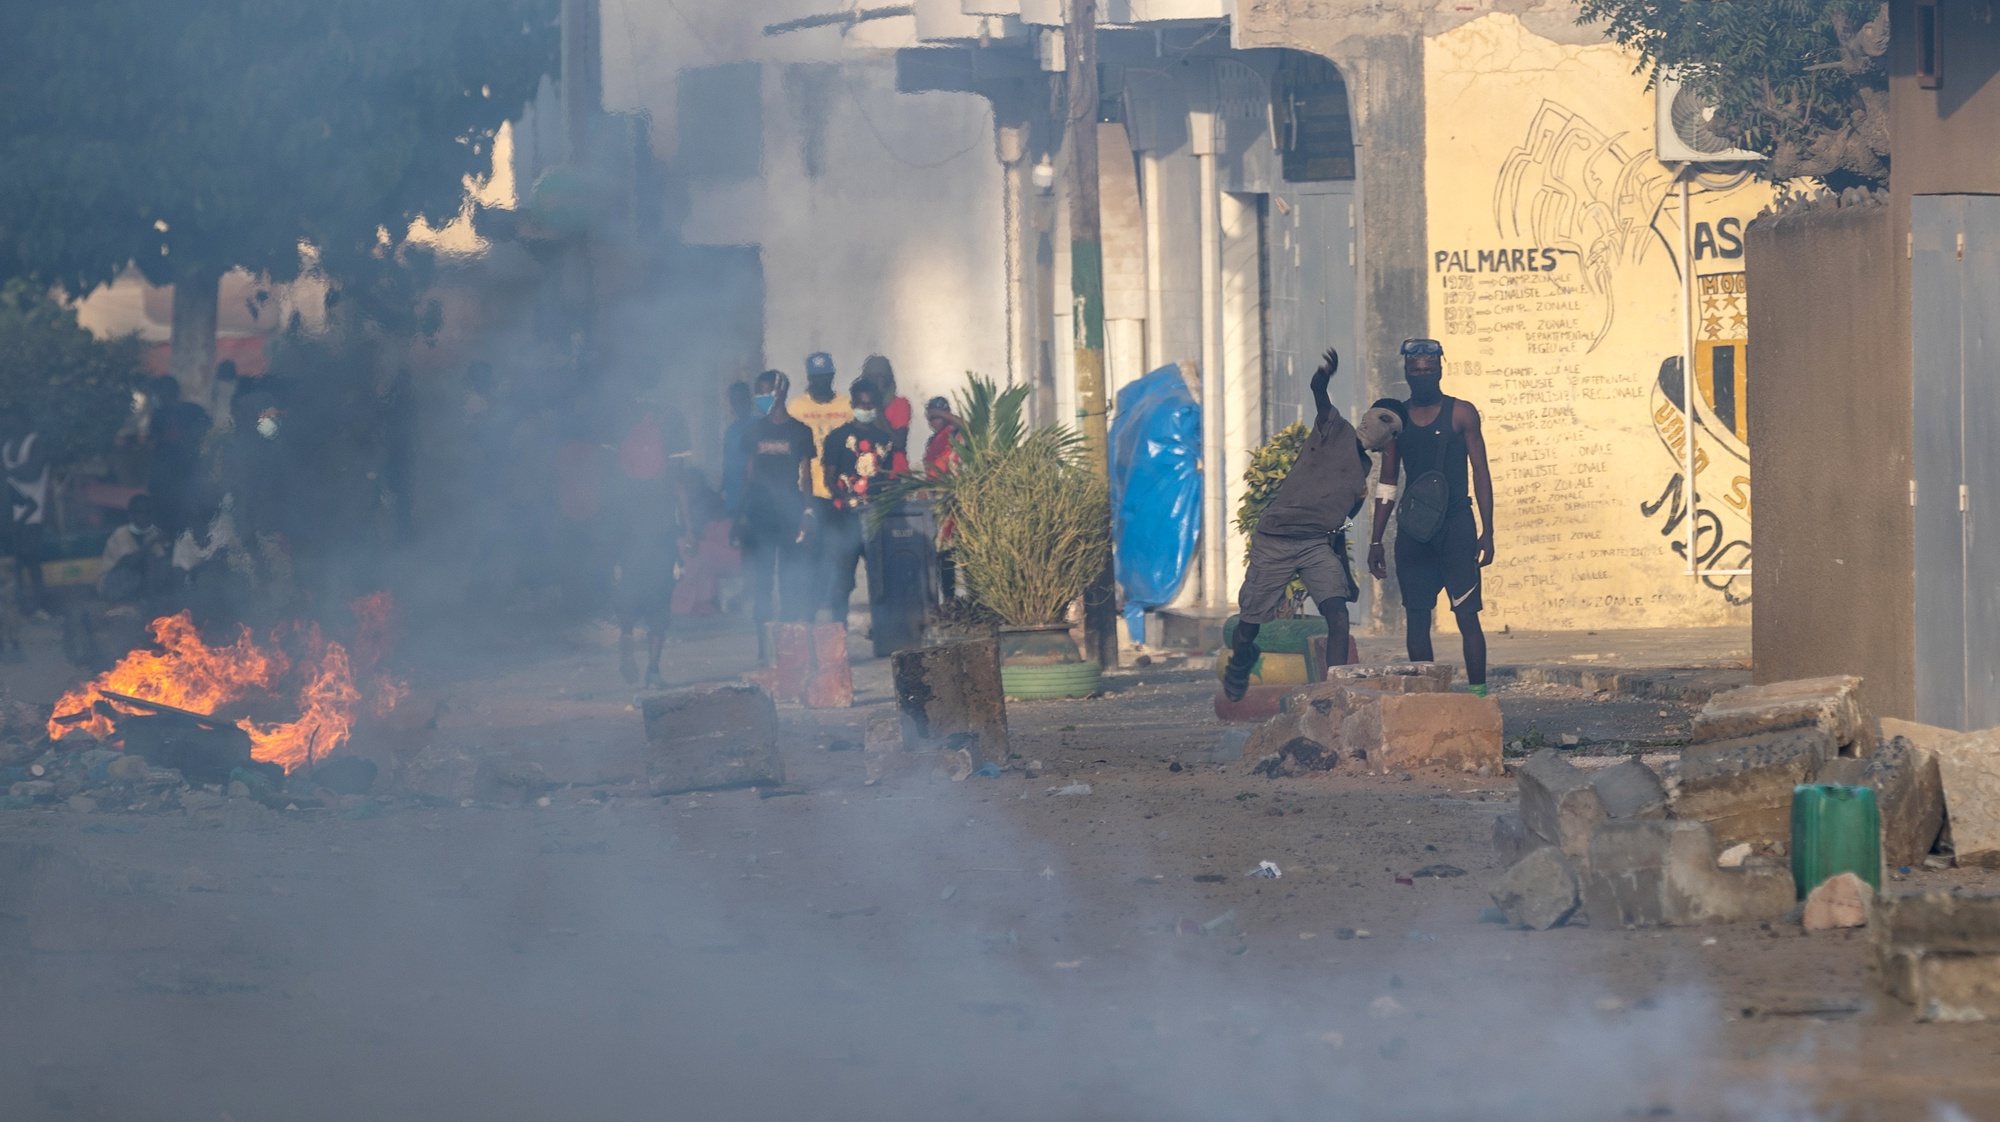 epa10671665 Protesters throw stones at police during a riot in Dakar, Senegal, 03 June 2023. Riots have taken place in Dakar and other cities in Senegal following the conviction on 01 June 2023 of opposition leader Ousmane Sonko on charges of corruption.  EPA/JEROME FAVRE